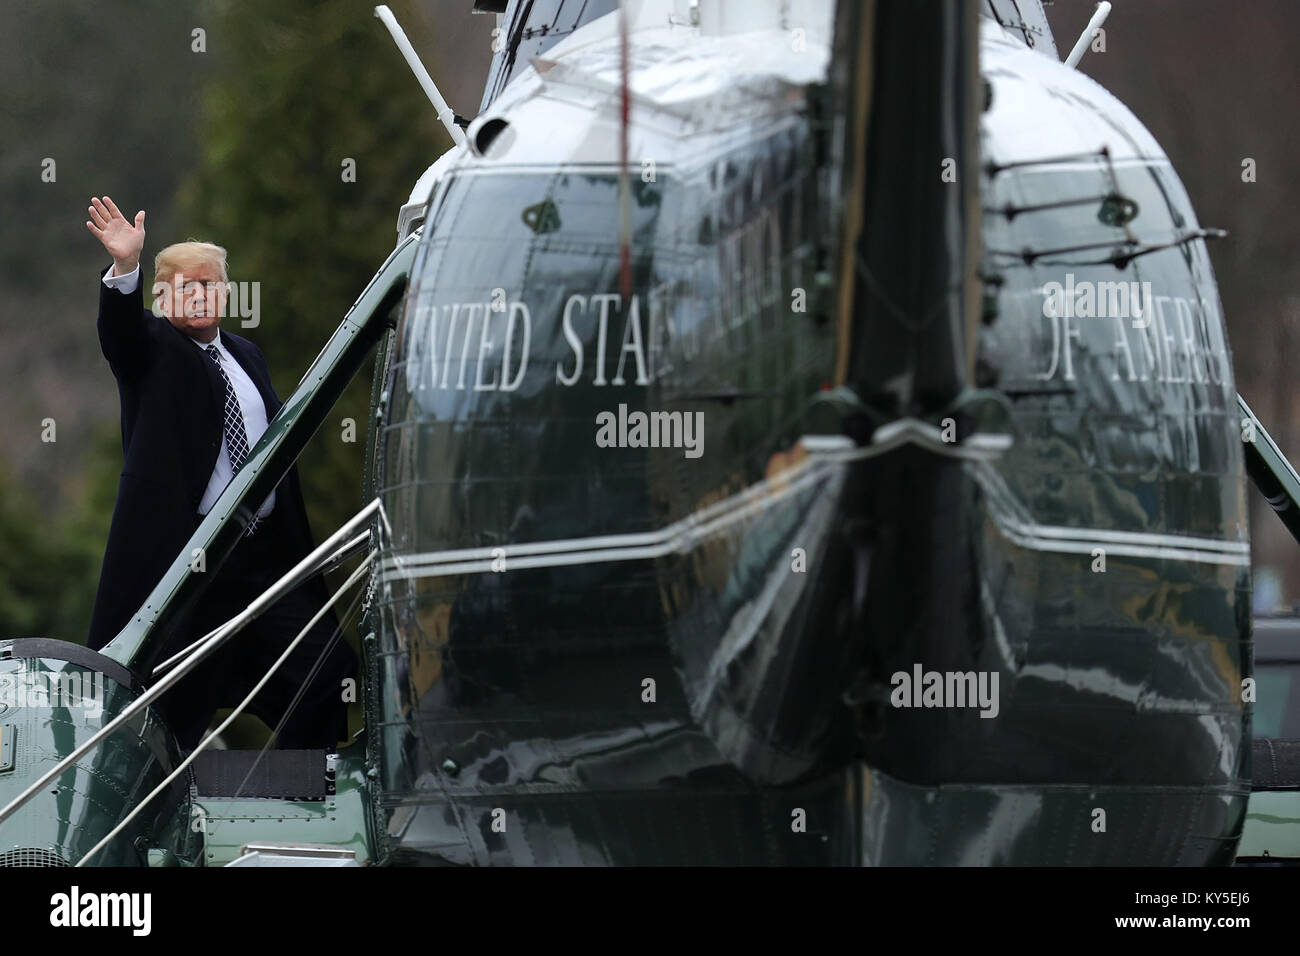 Bethesda, United States Of America. 12th Jan, 2018. United States President Donald J. Trump waves to journalists as he boards Marine One on departure from Walter Reed National Military Medical Center following his annual physical examination January 12, 2018 in Bethesda, Maryland. Trump will next travel to Florida to spend the Dr. Martin Luther King Jr. Day holiday weekend at his Mar-a-Lago resort. Credit: Chip Somodevilla/Pool via CNP Photo via Credit: Newscom/Alamy Live News Stock Photo